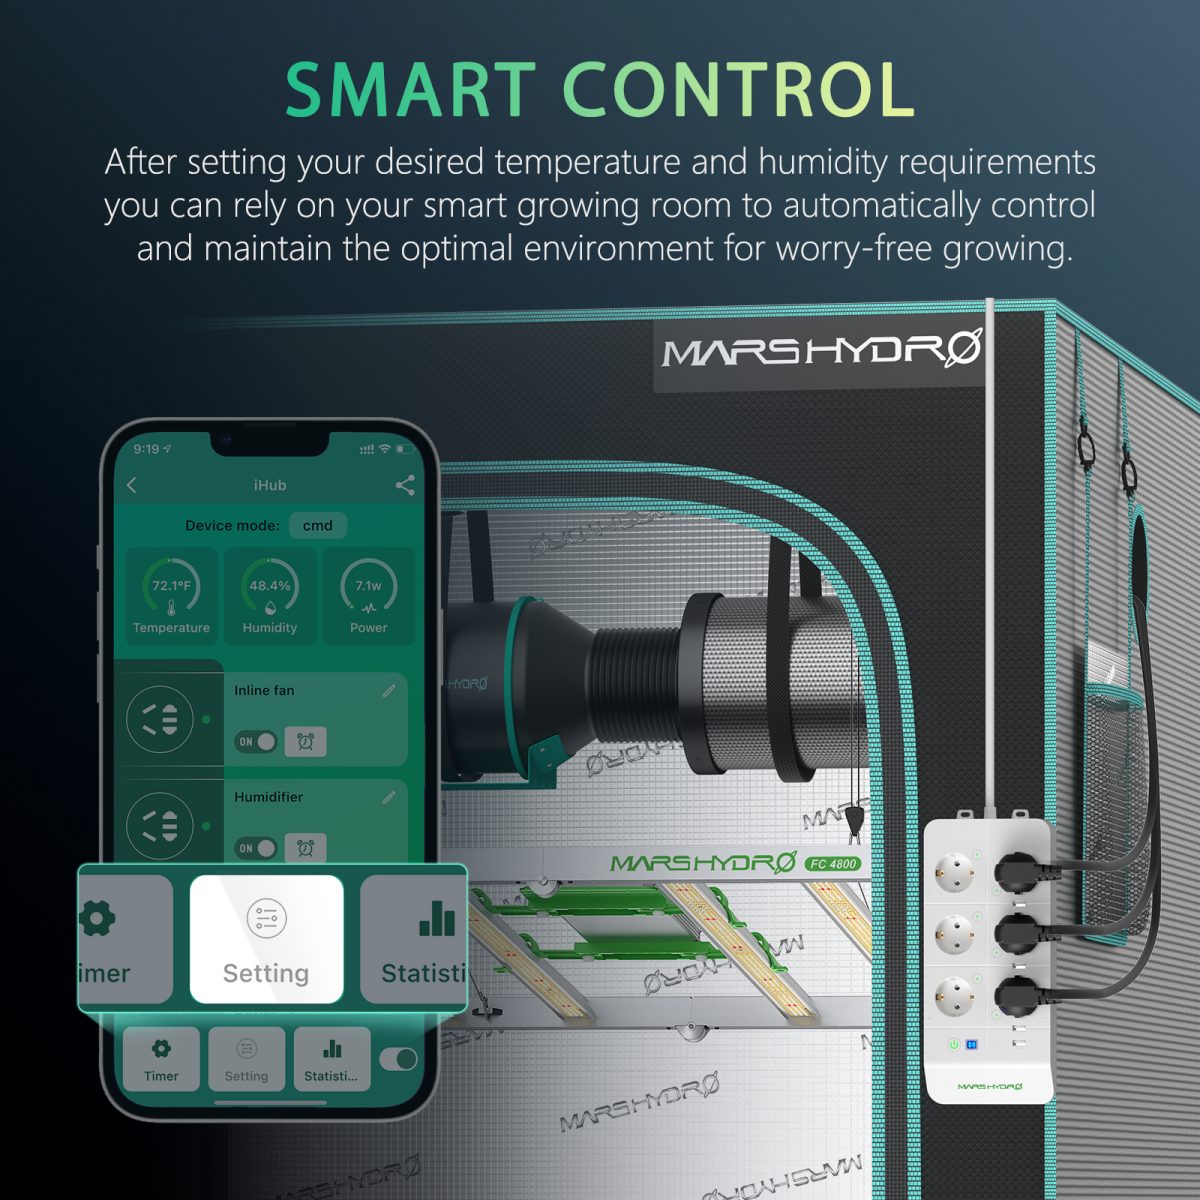 Mars Hydro iHub power strip works in unison with the Mars Hydro APP to help you automate and manage your indoor garden, providing accurate and accessible data, all via your smartphone.